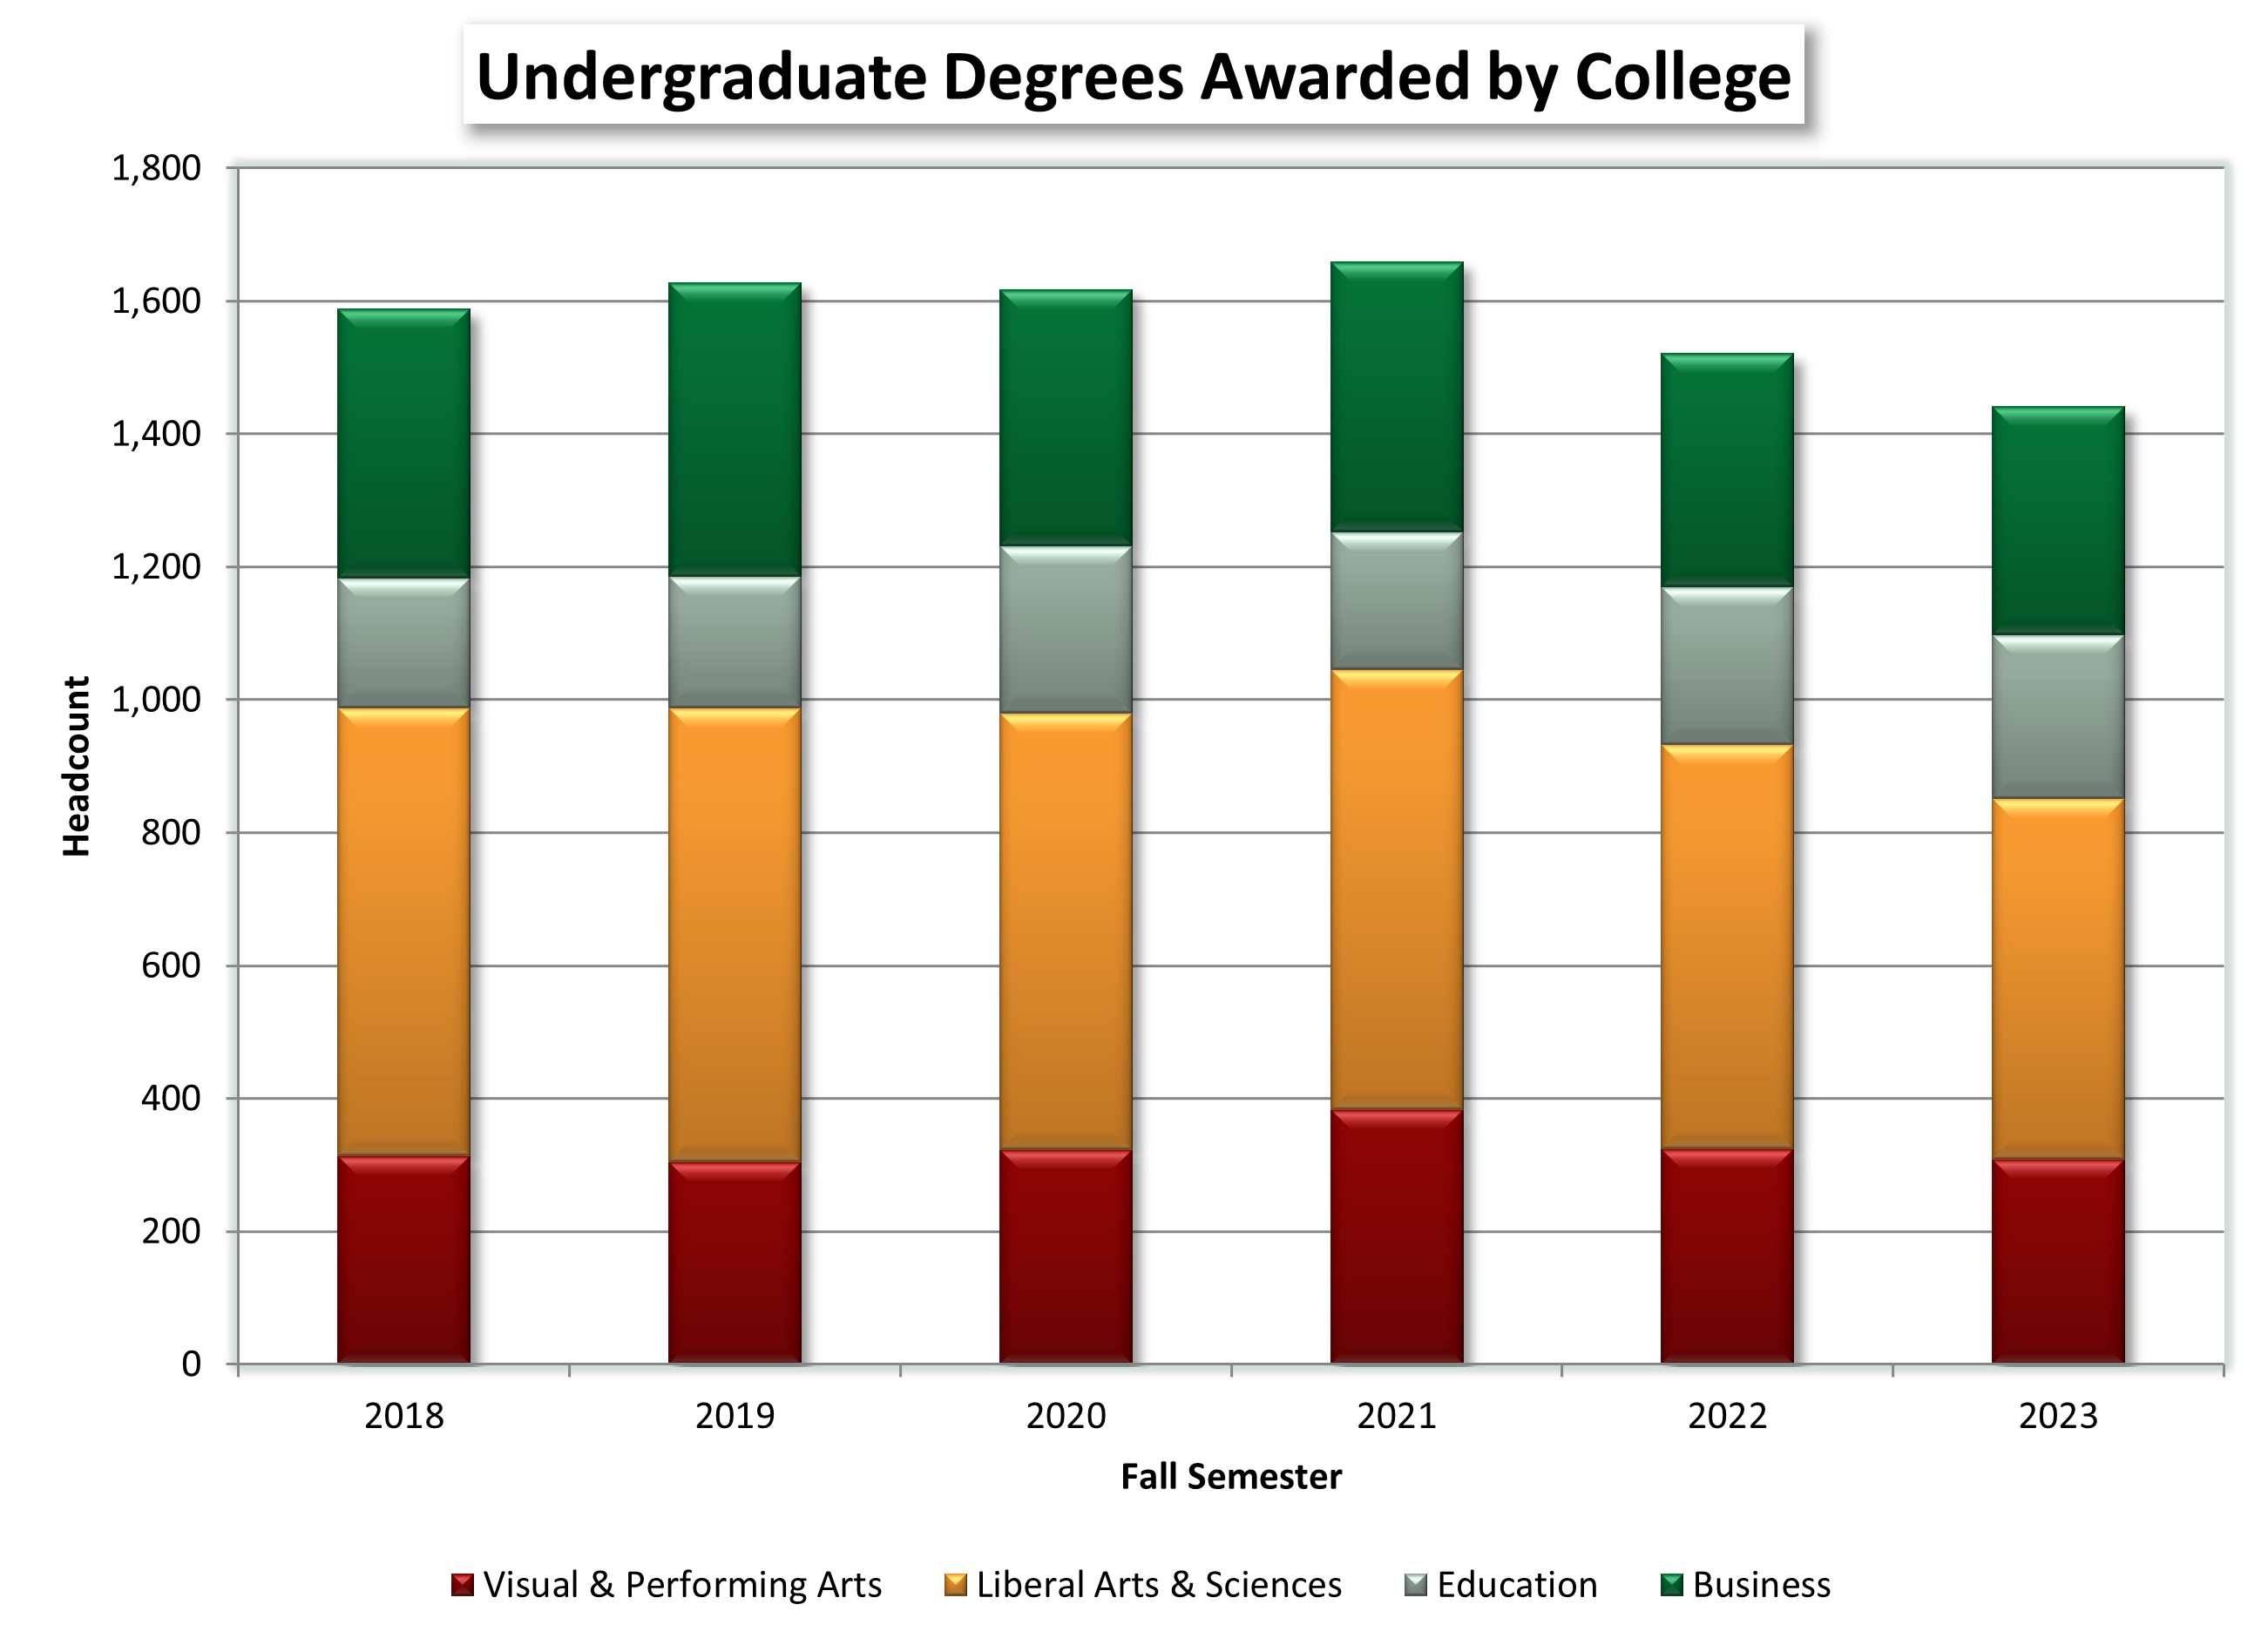 Undergraduate Degrees Awarded by College chart